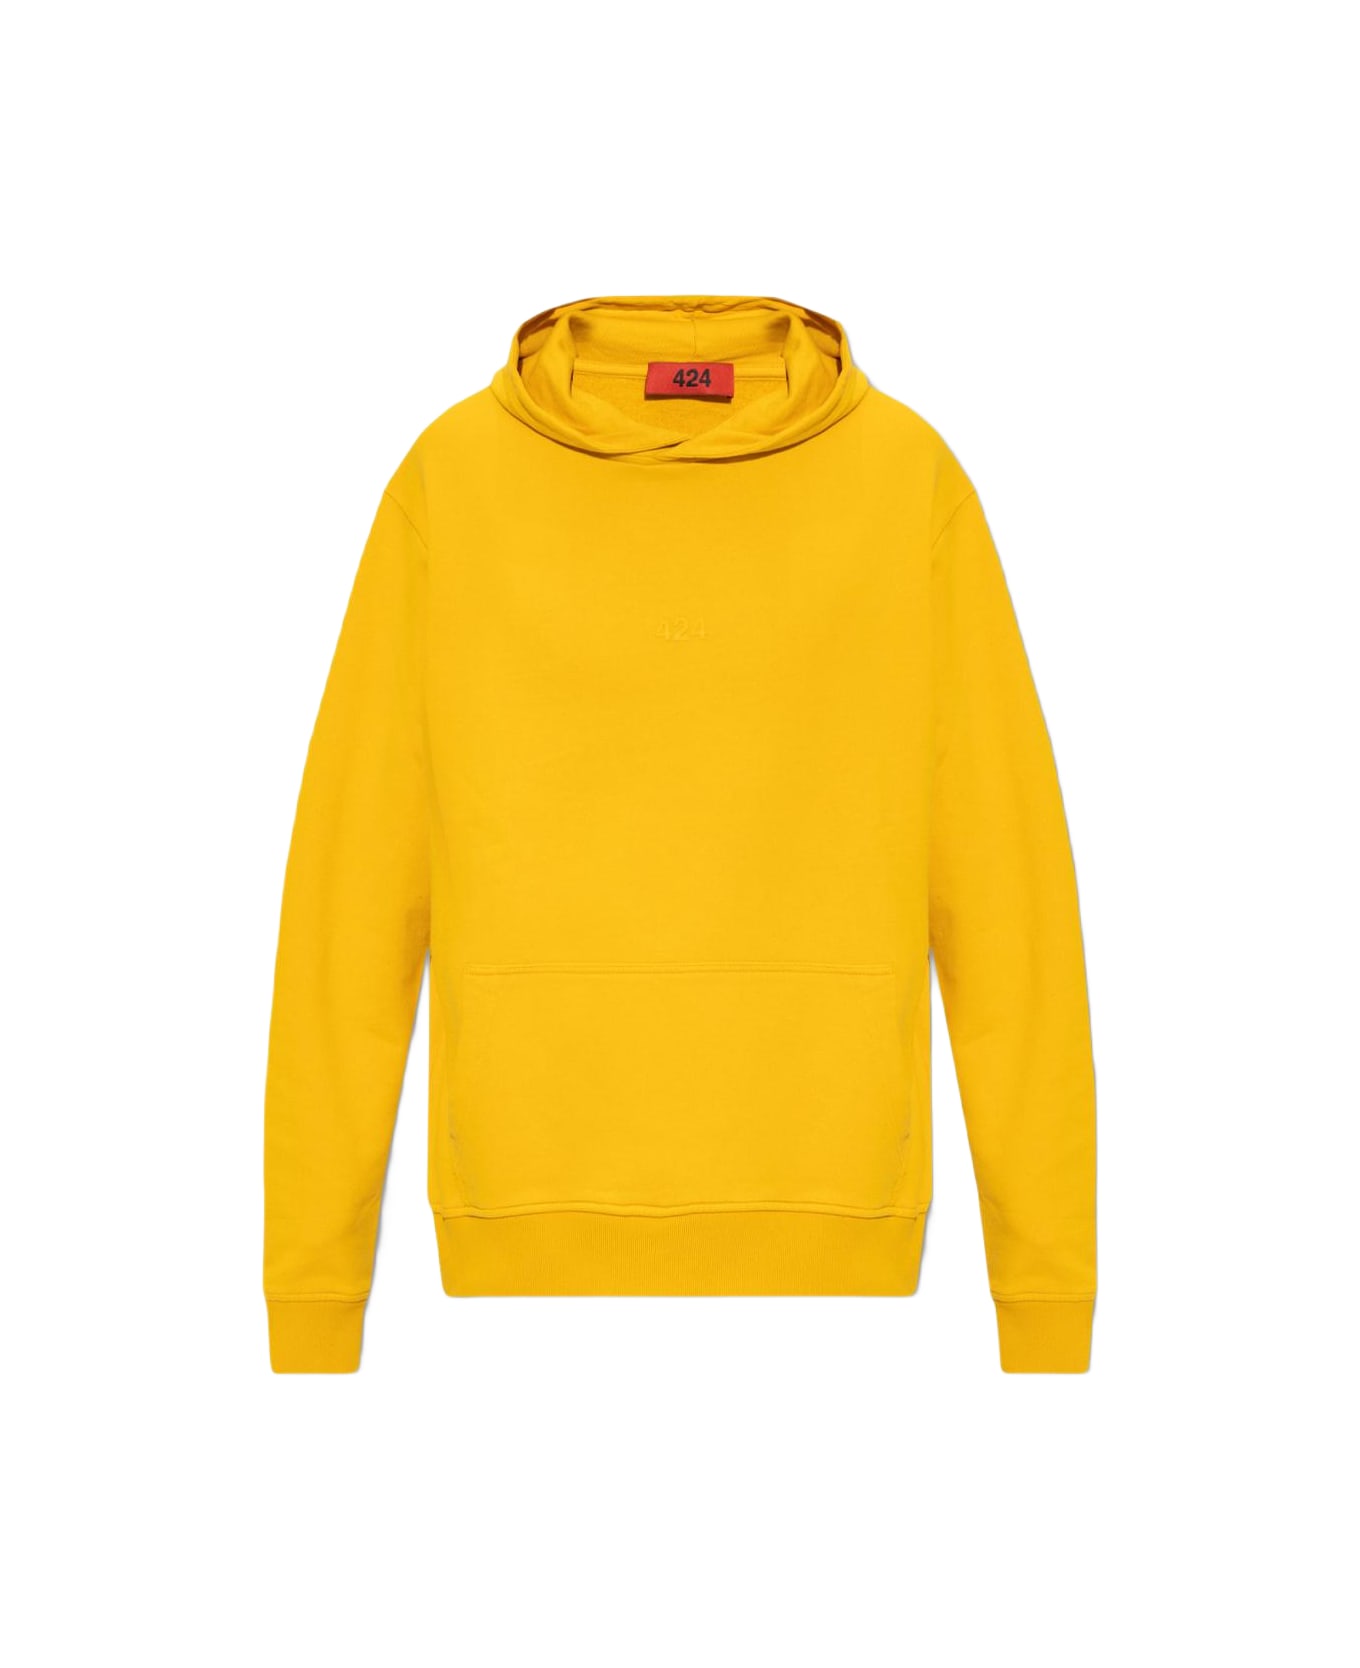 FourTwoFour on Fairfax Hoodie With Logo - YELLOW